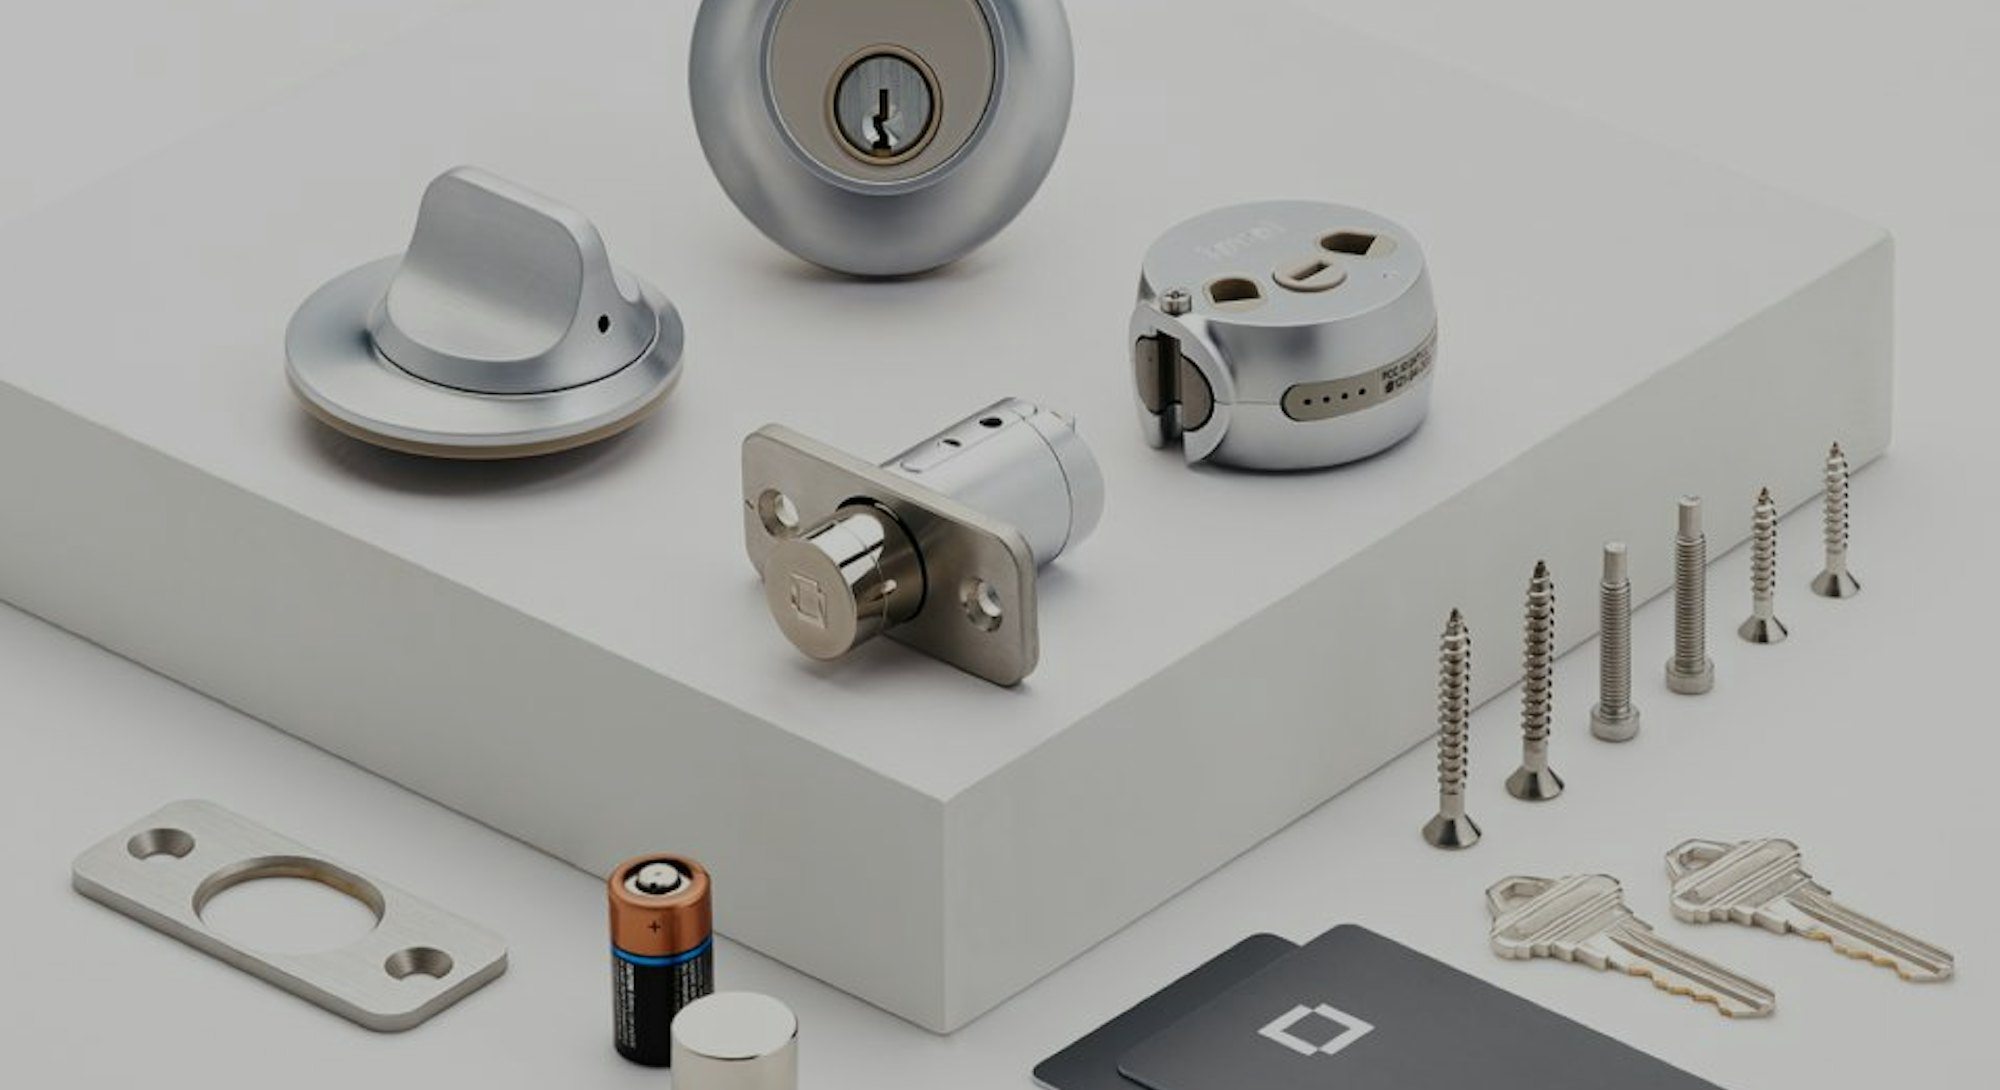 Level Touch smart lock components